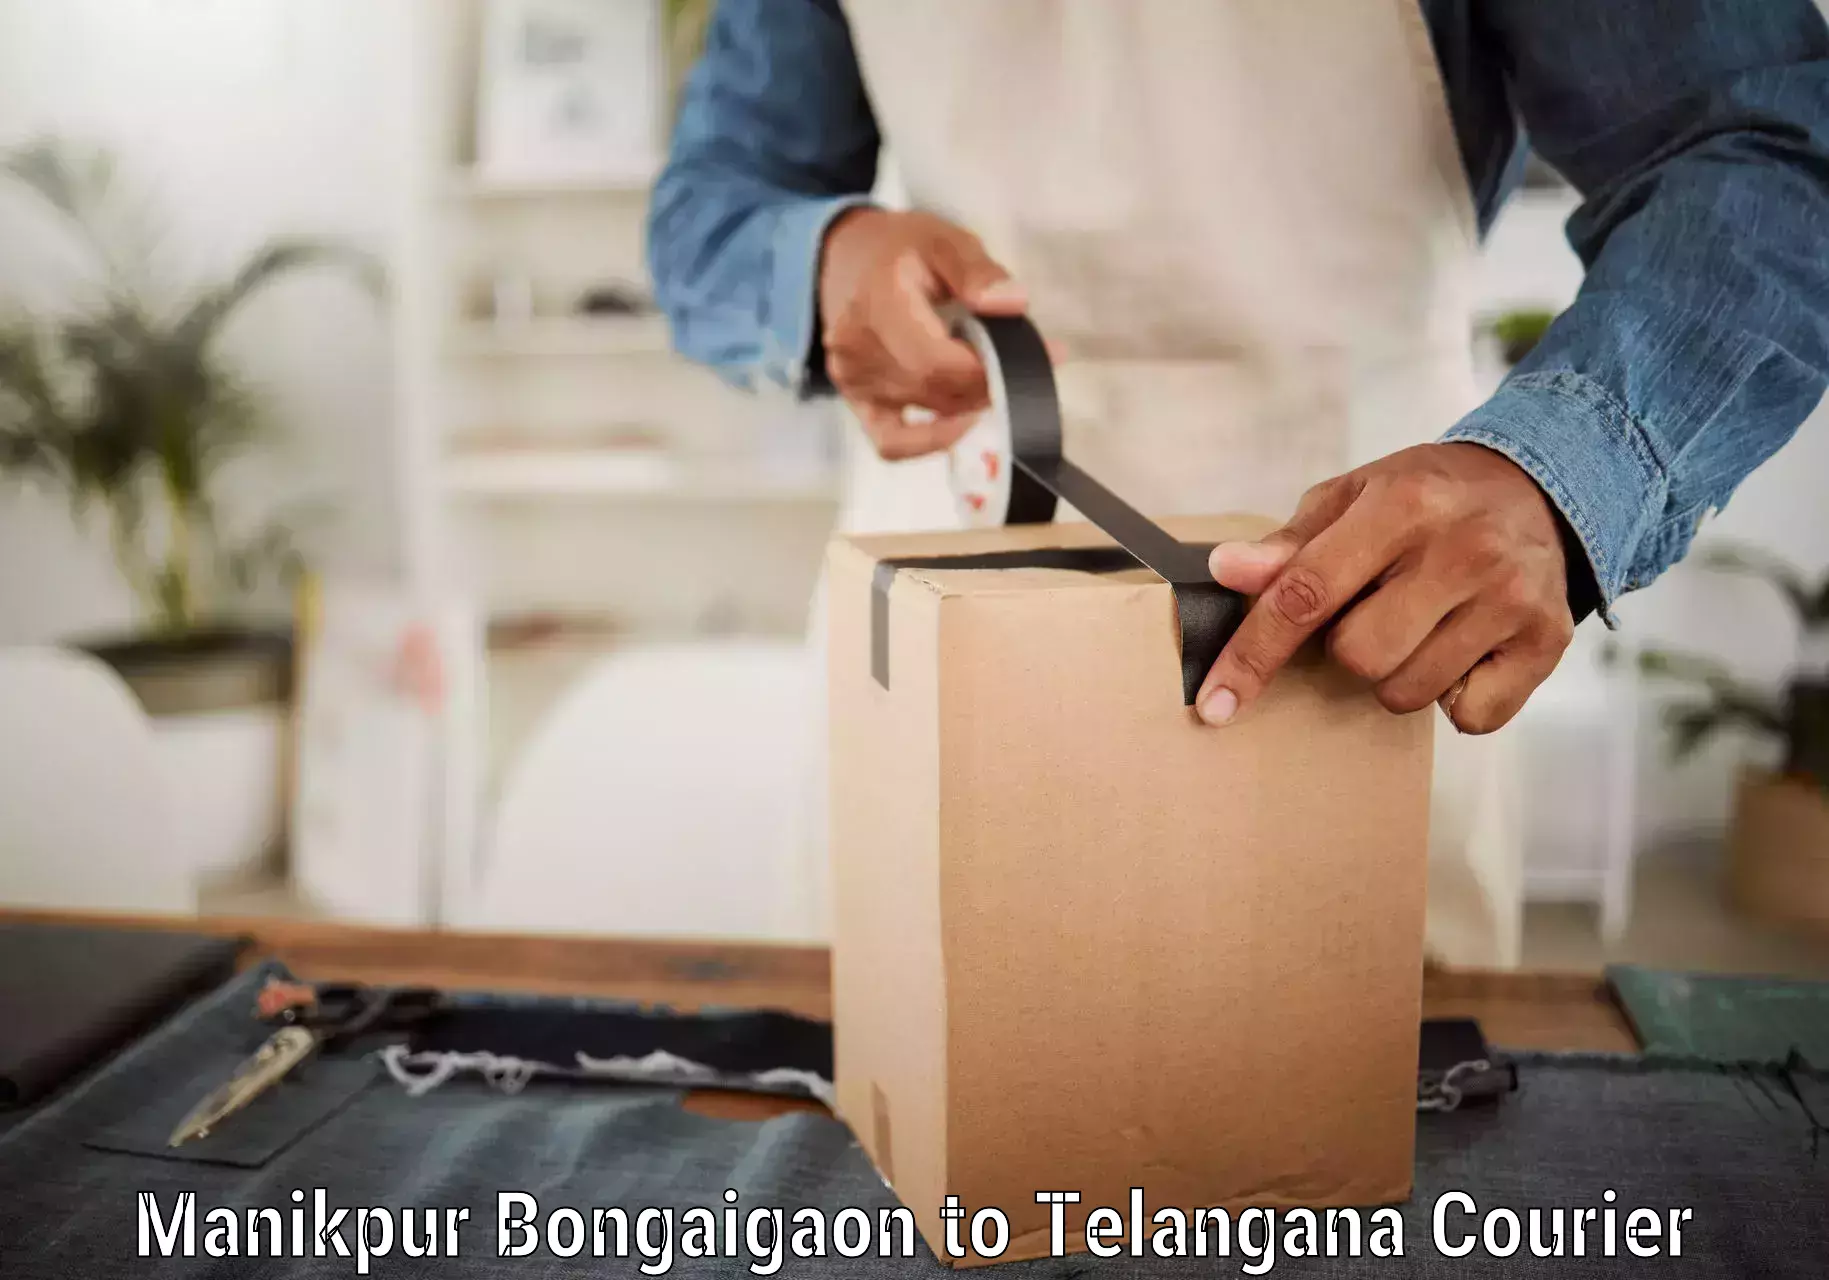 Personalized courier experiences Manikpur Bongaigaon to Rangareddy